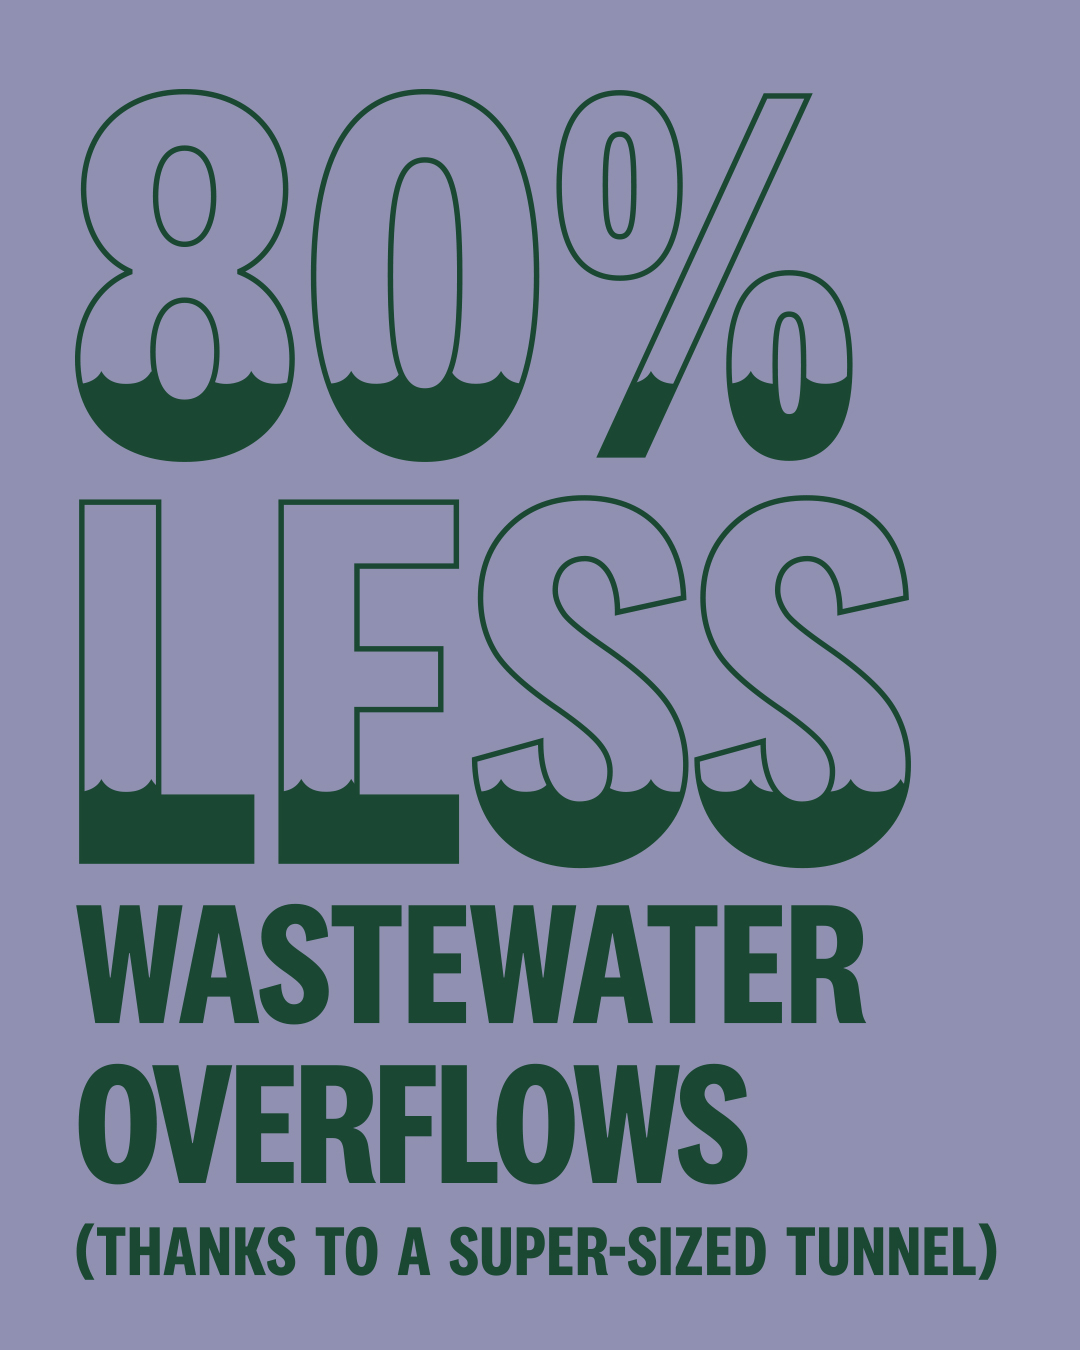 80% less wastewater overflows (Thanks to a supersized tunnel). More clean waterways and beaches for Auckland.